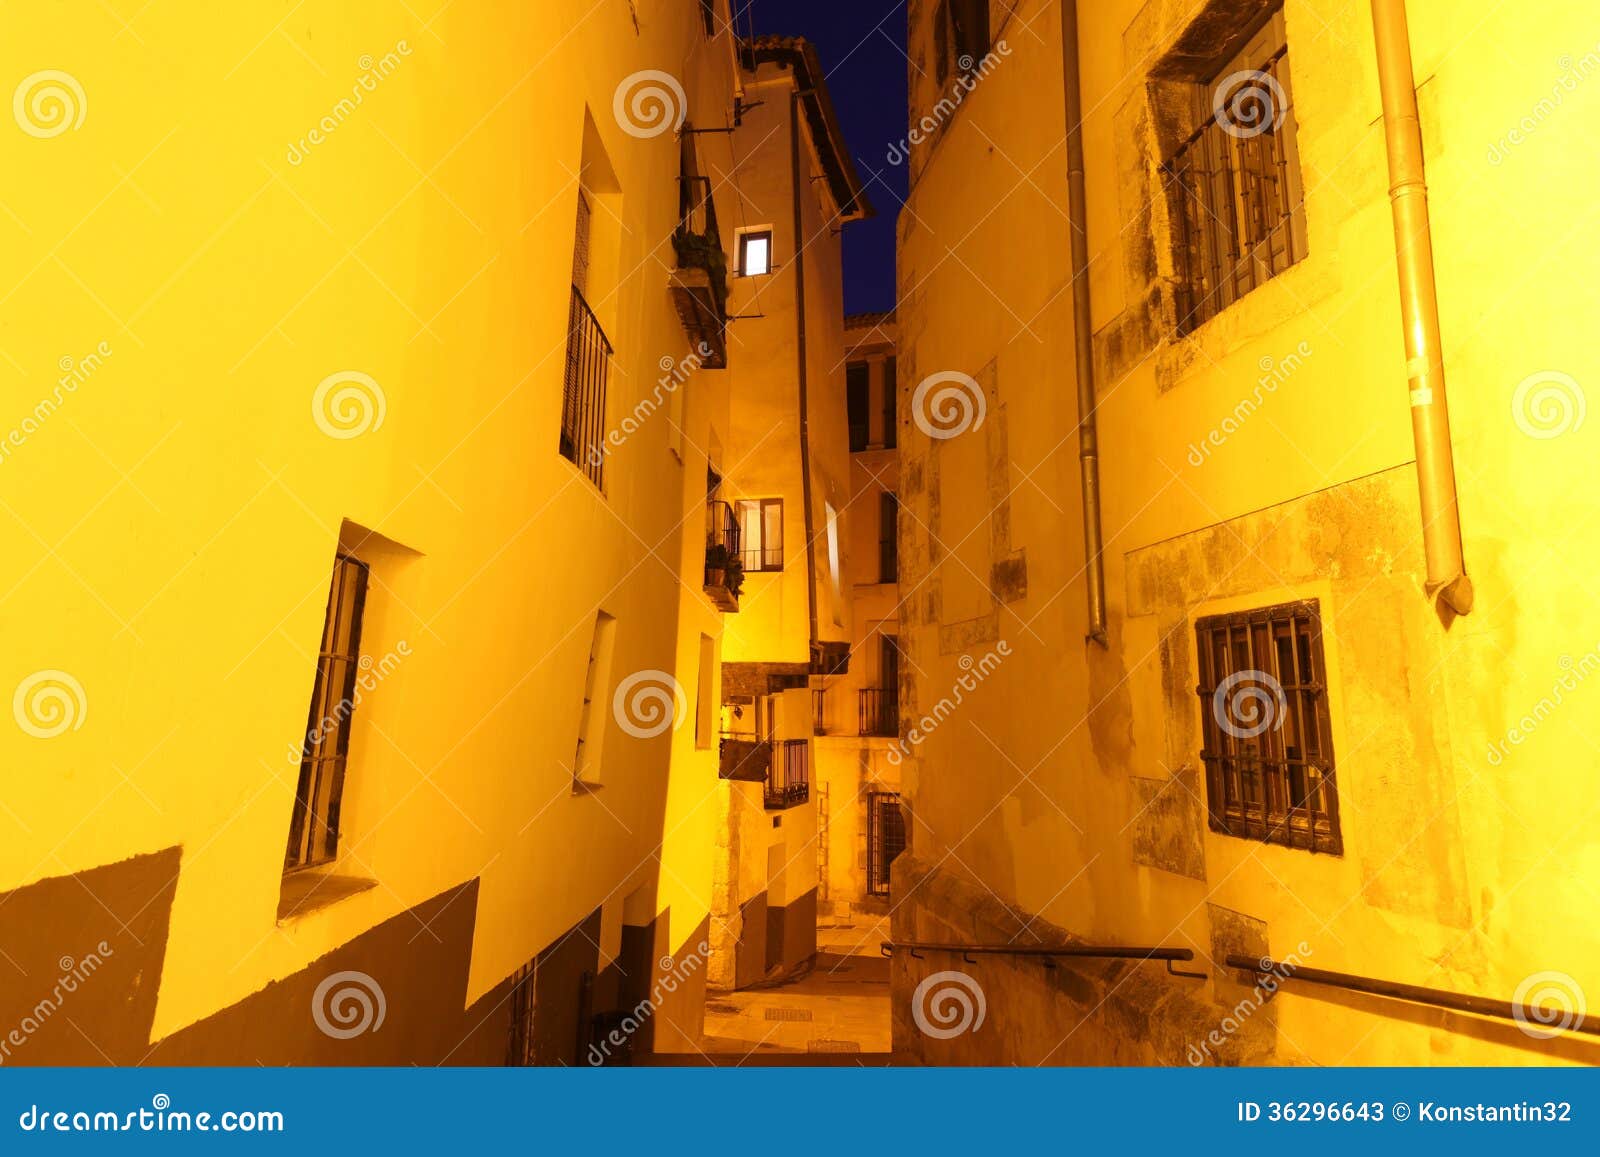 night view of picturesque old street in cuenca. spain